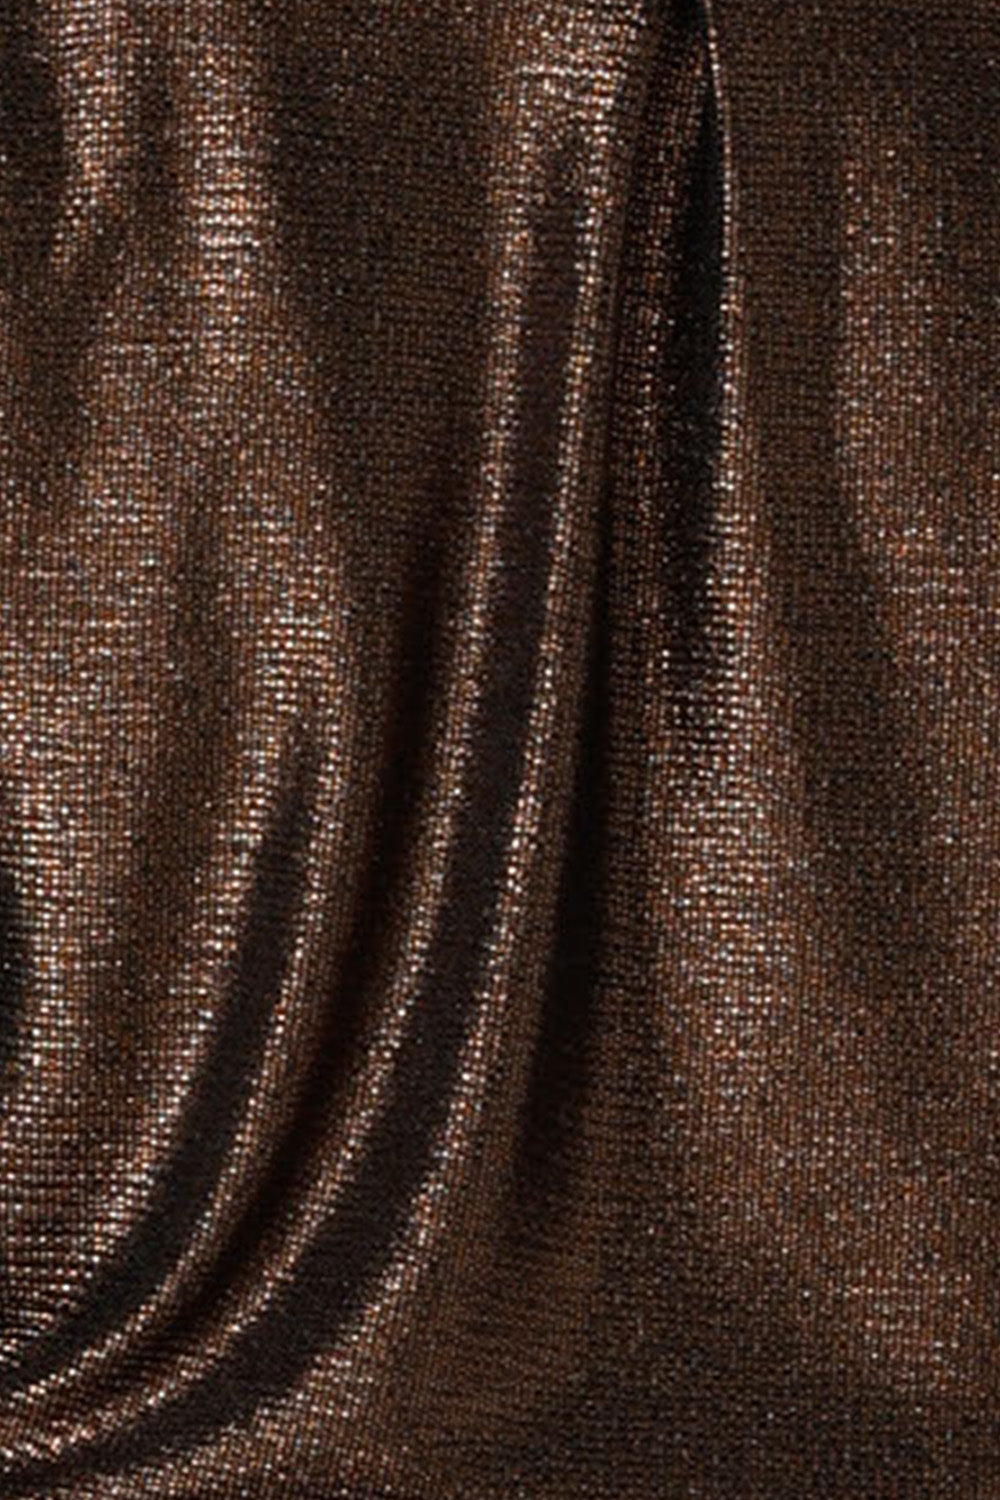 fabric swatch of Mocha Xanadu, a shimmering jersey fabric in shades of copper and brown, this sparkly fabric is used by Australian and New Zealand women's clothing label, L&F to make occasionwear tops and skirts in their new event and cocktail wear collection.